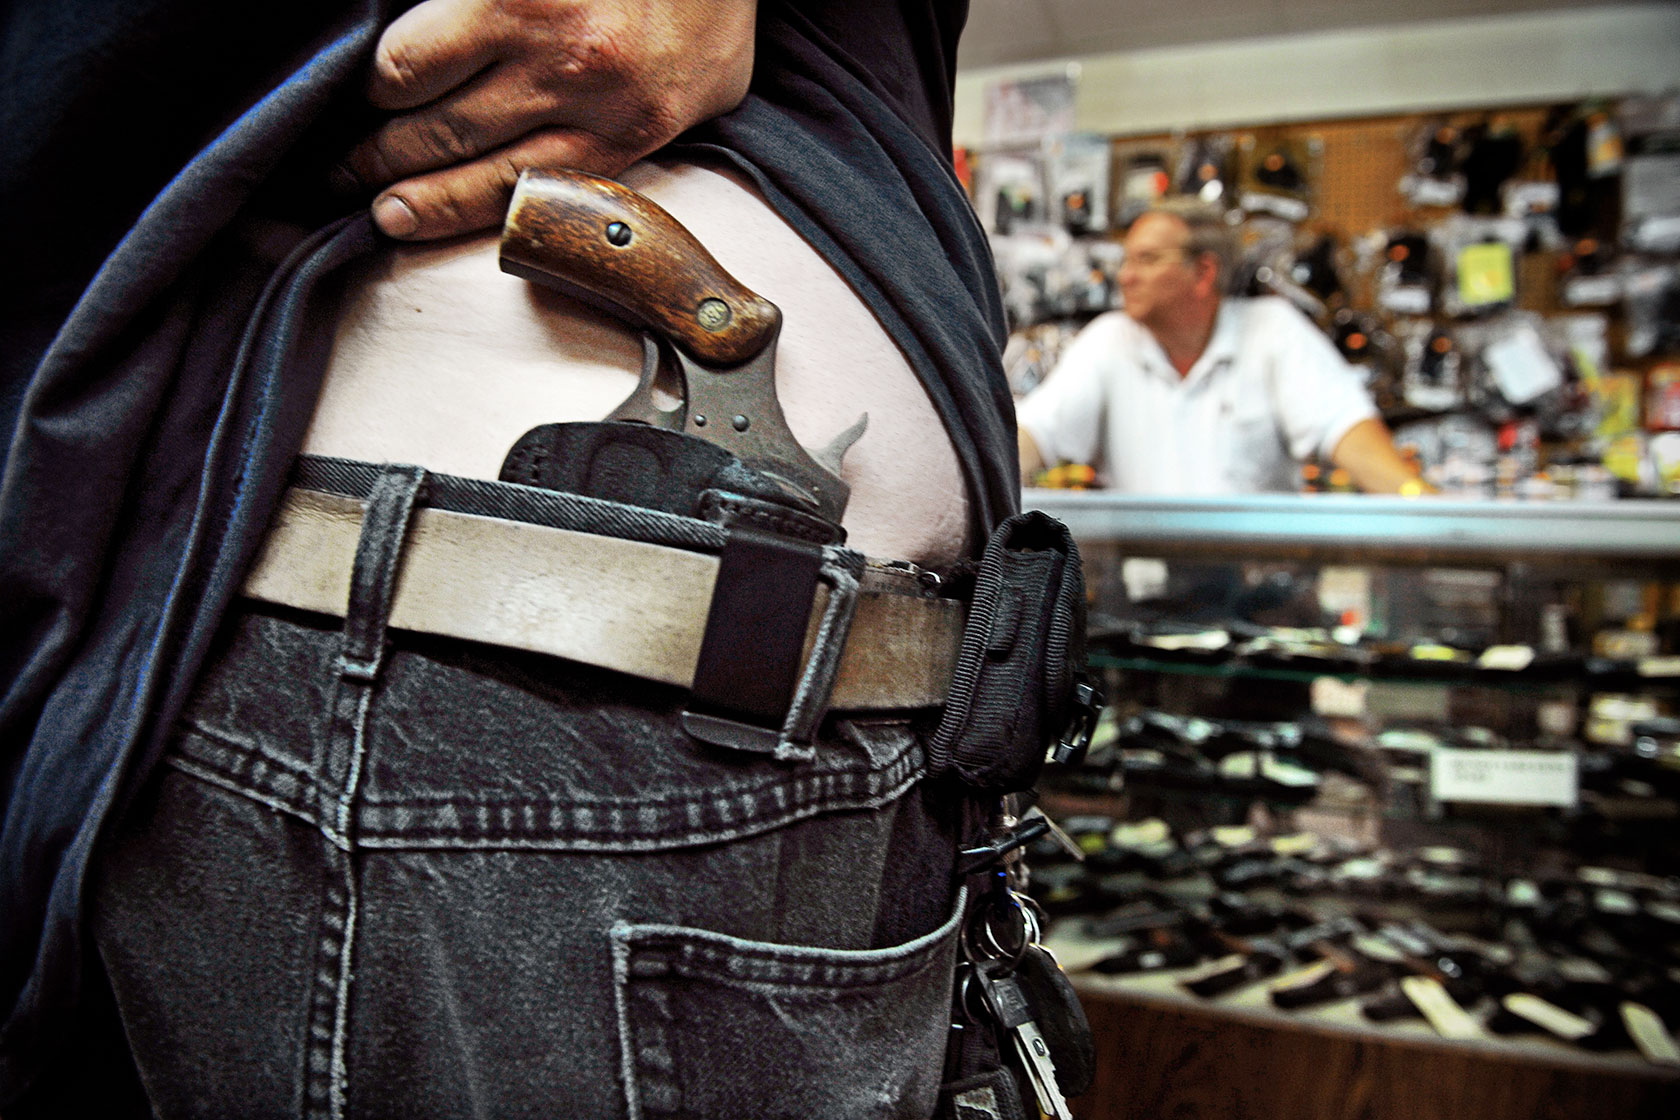 Ohio House panel approves bill to allow concealed carry without training,  license